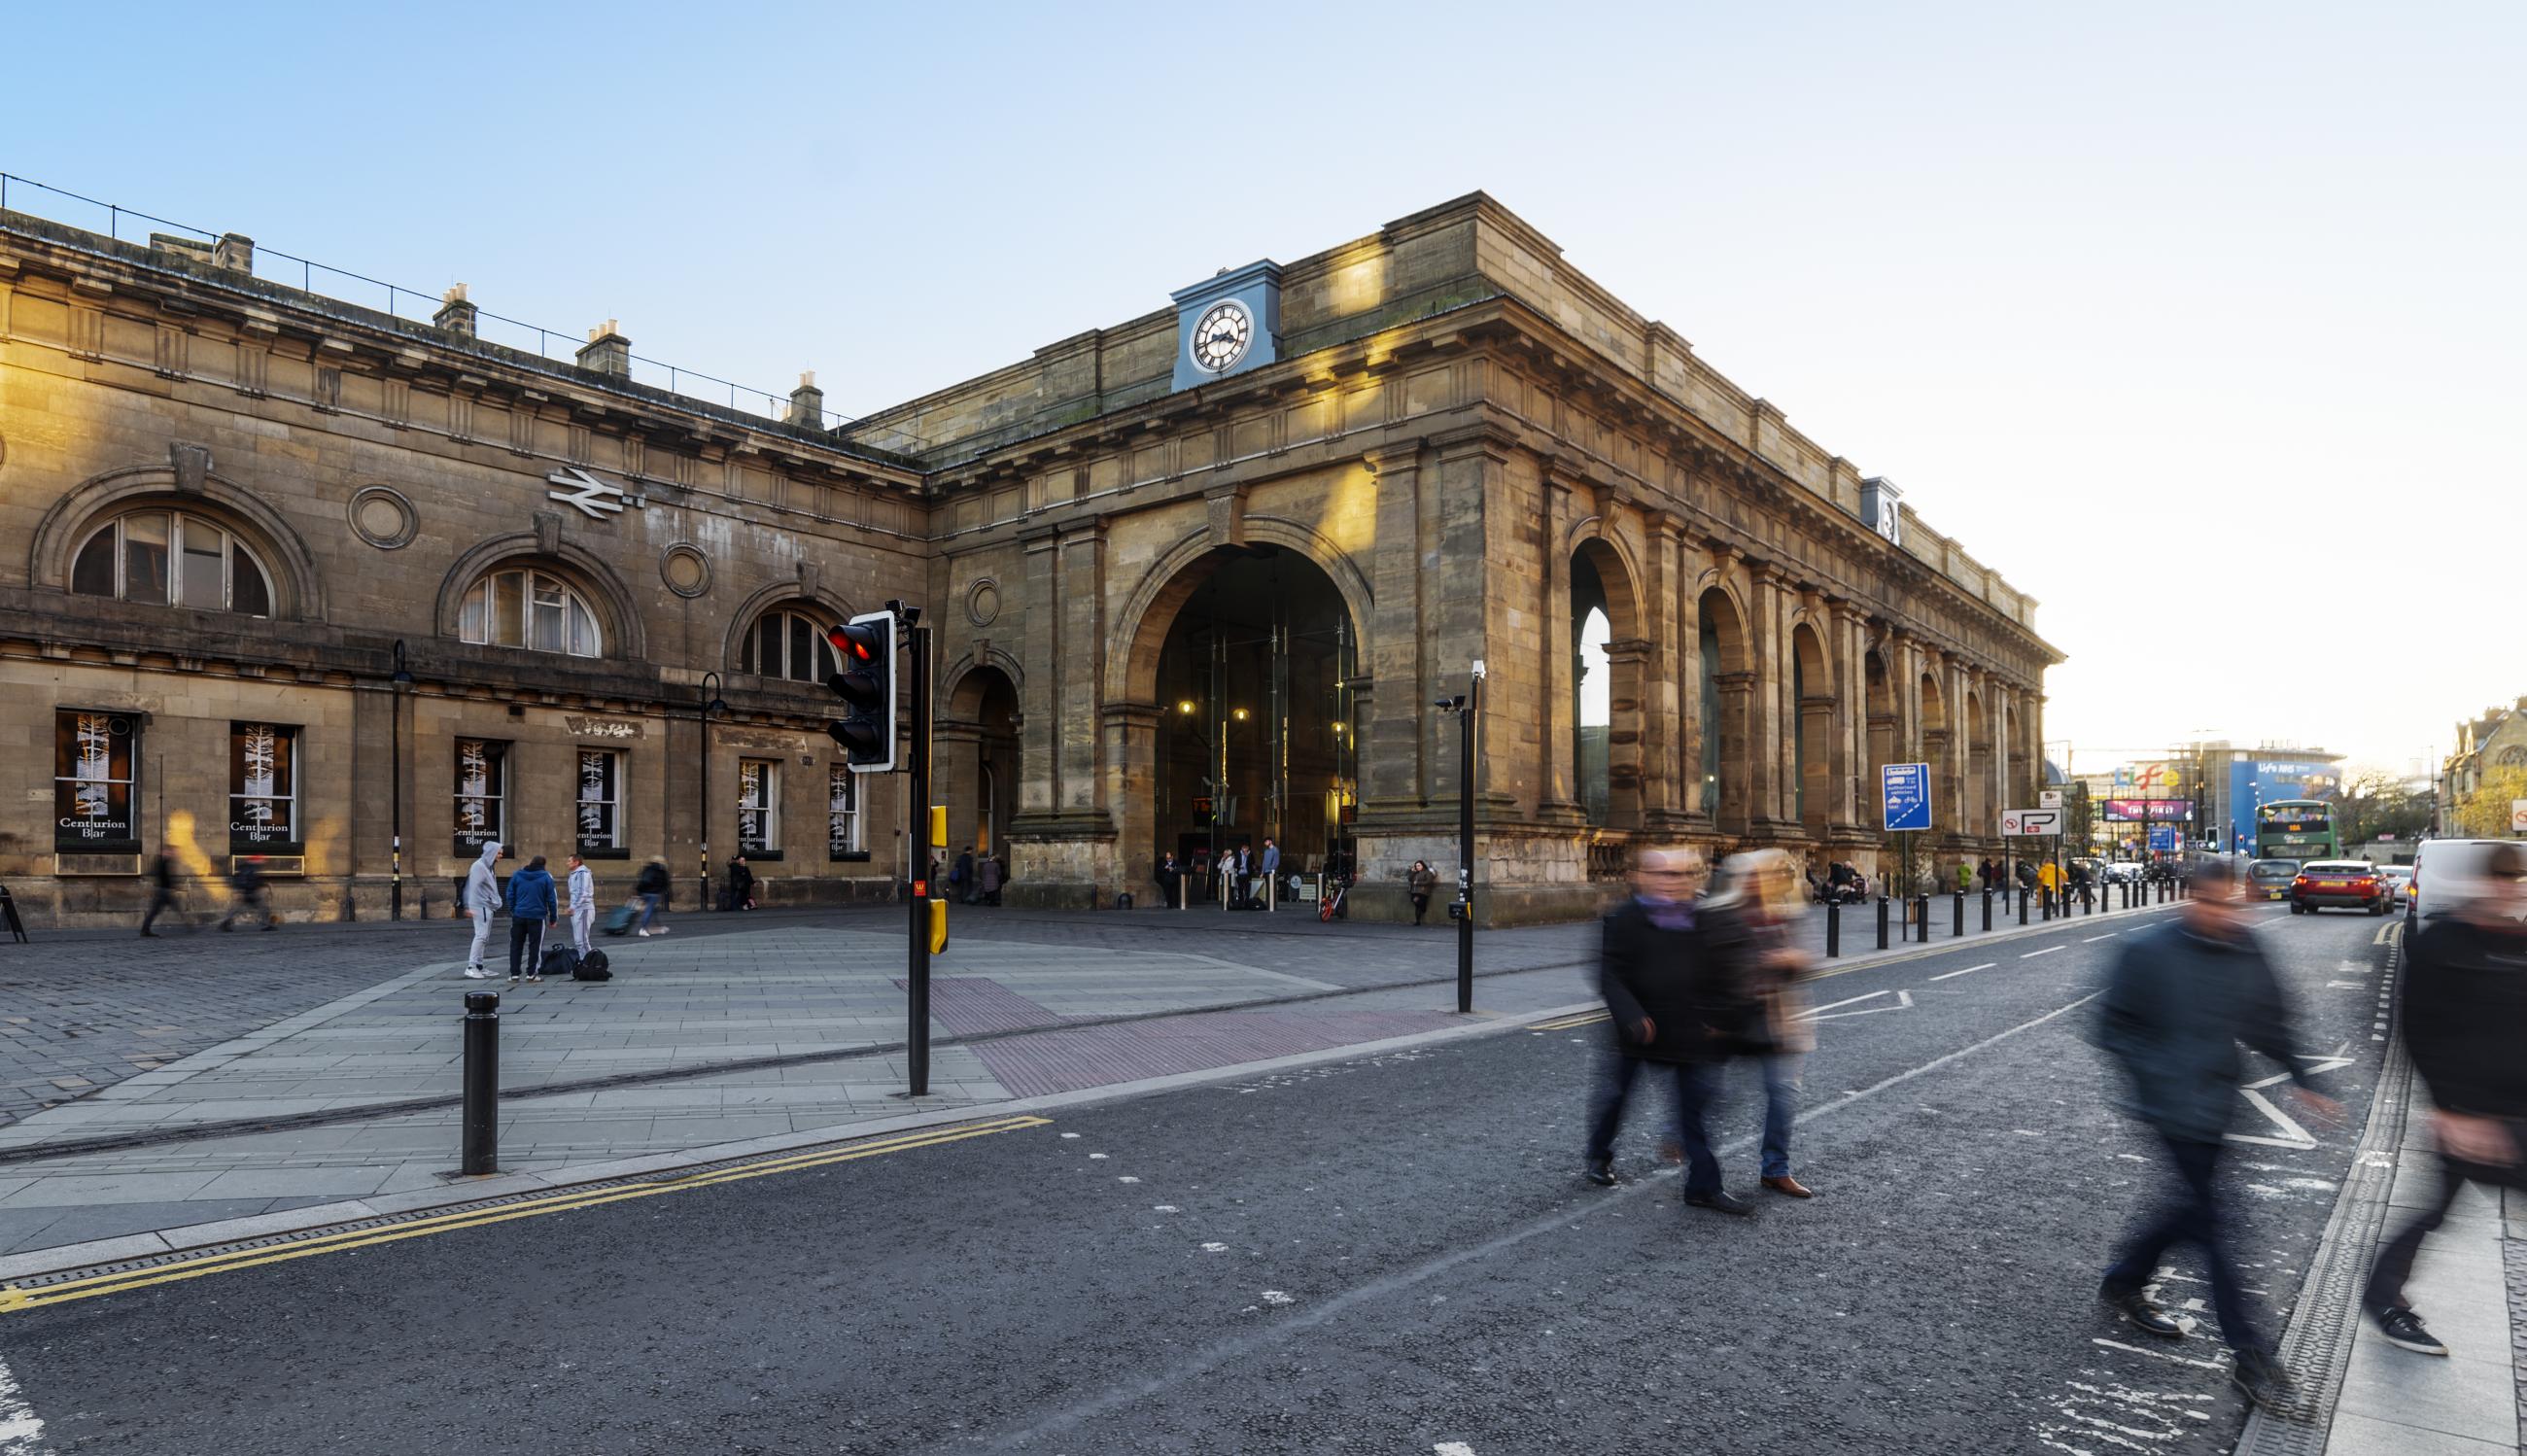 Newcastle Central is one of the stations set to benefit from the bid